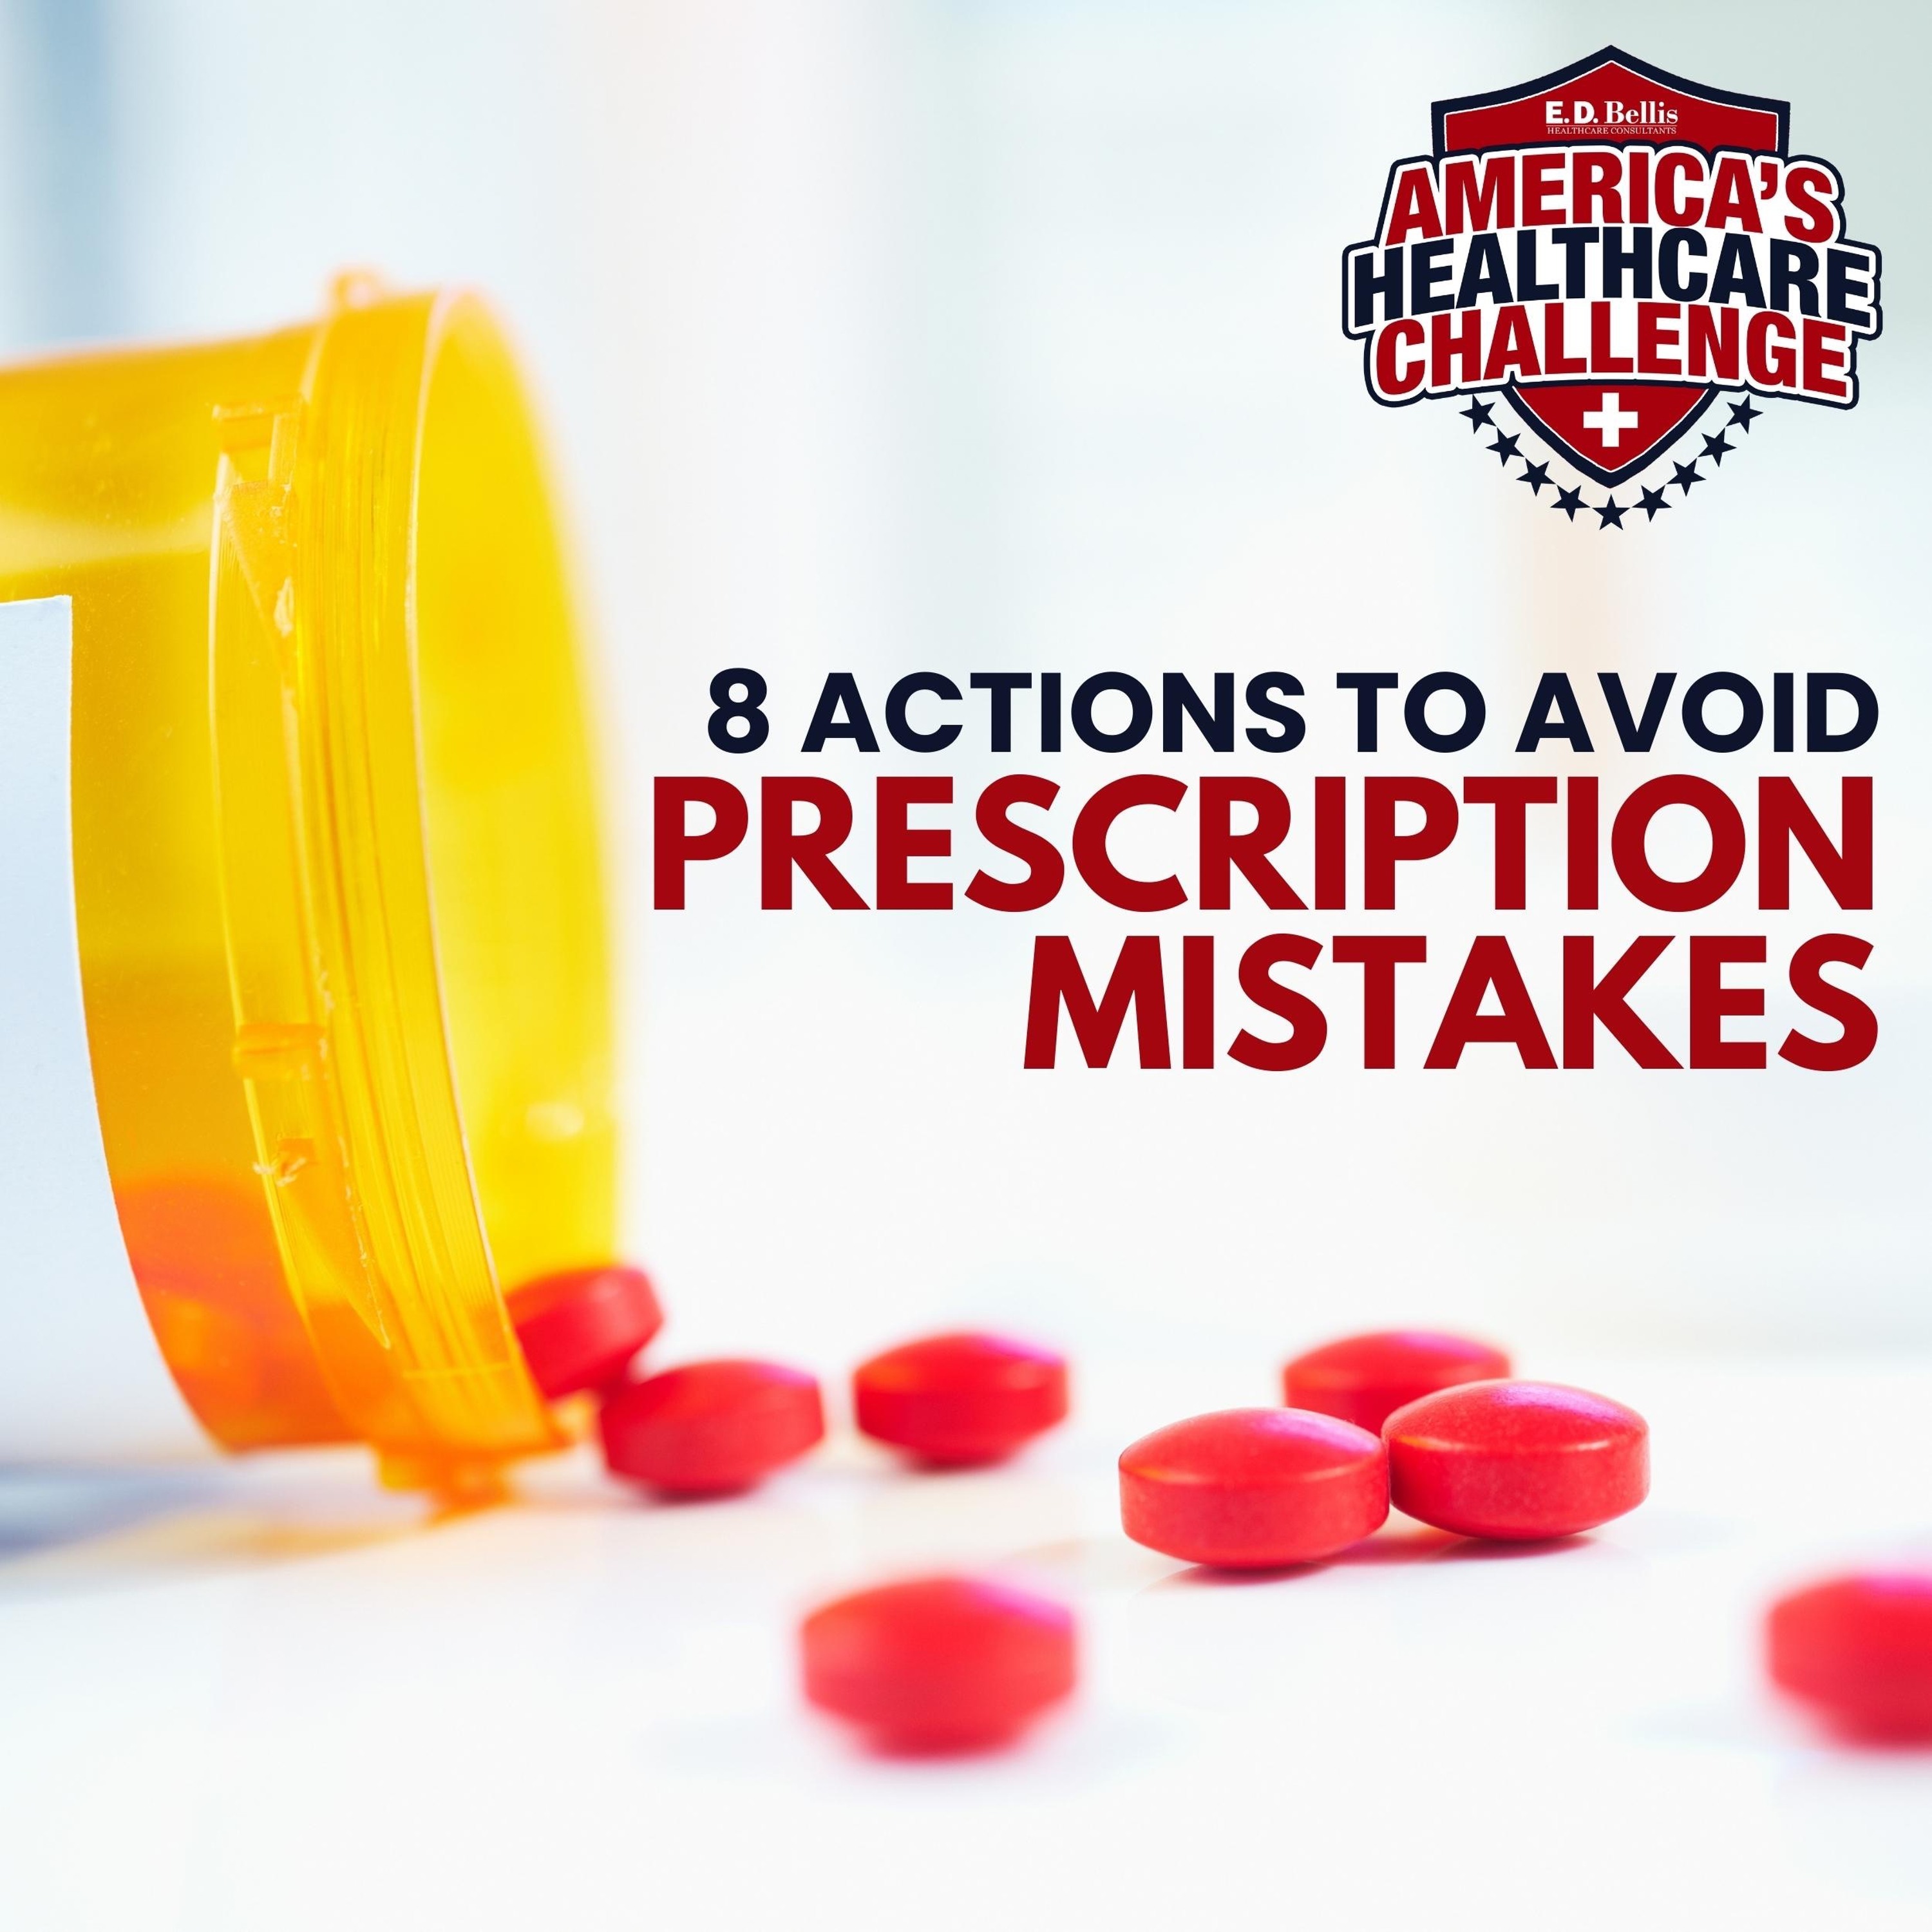 8 Actions To Avoid Prescription Mistakes